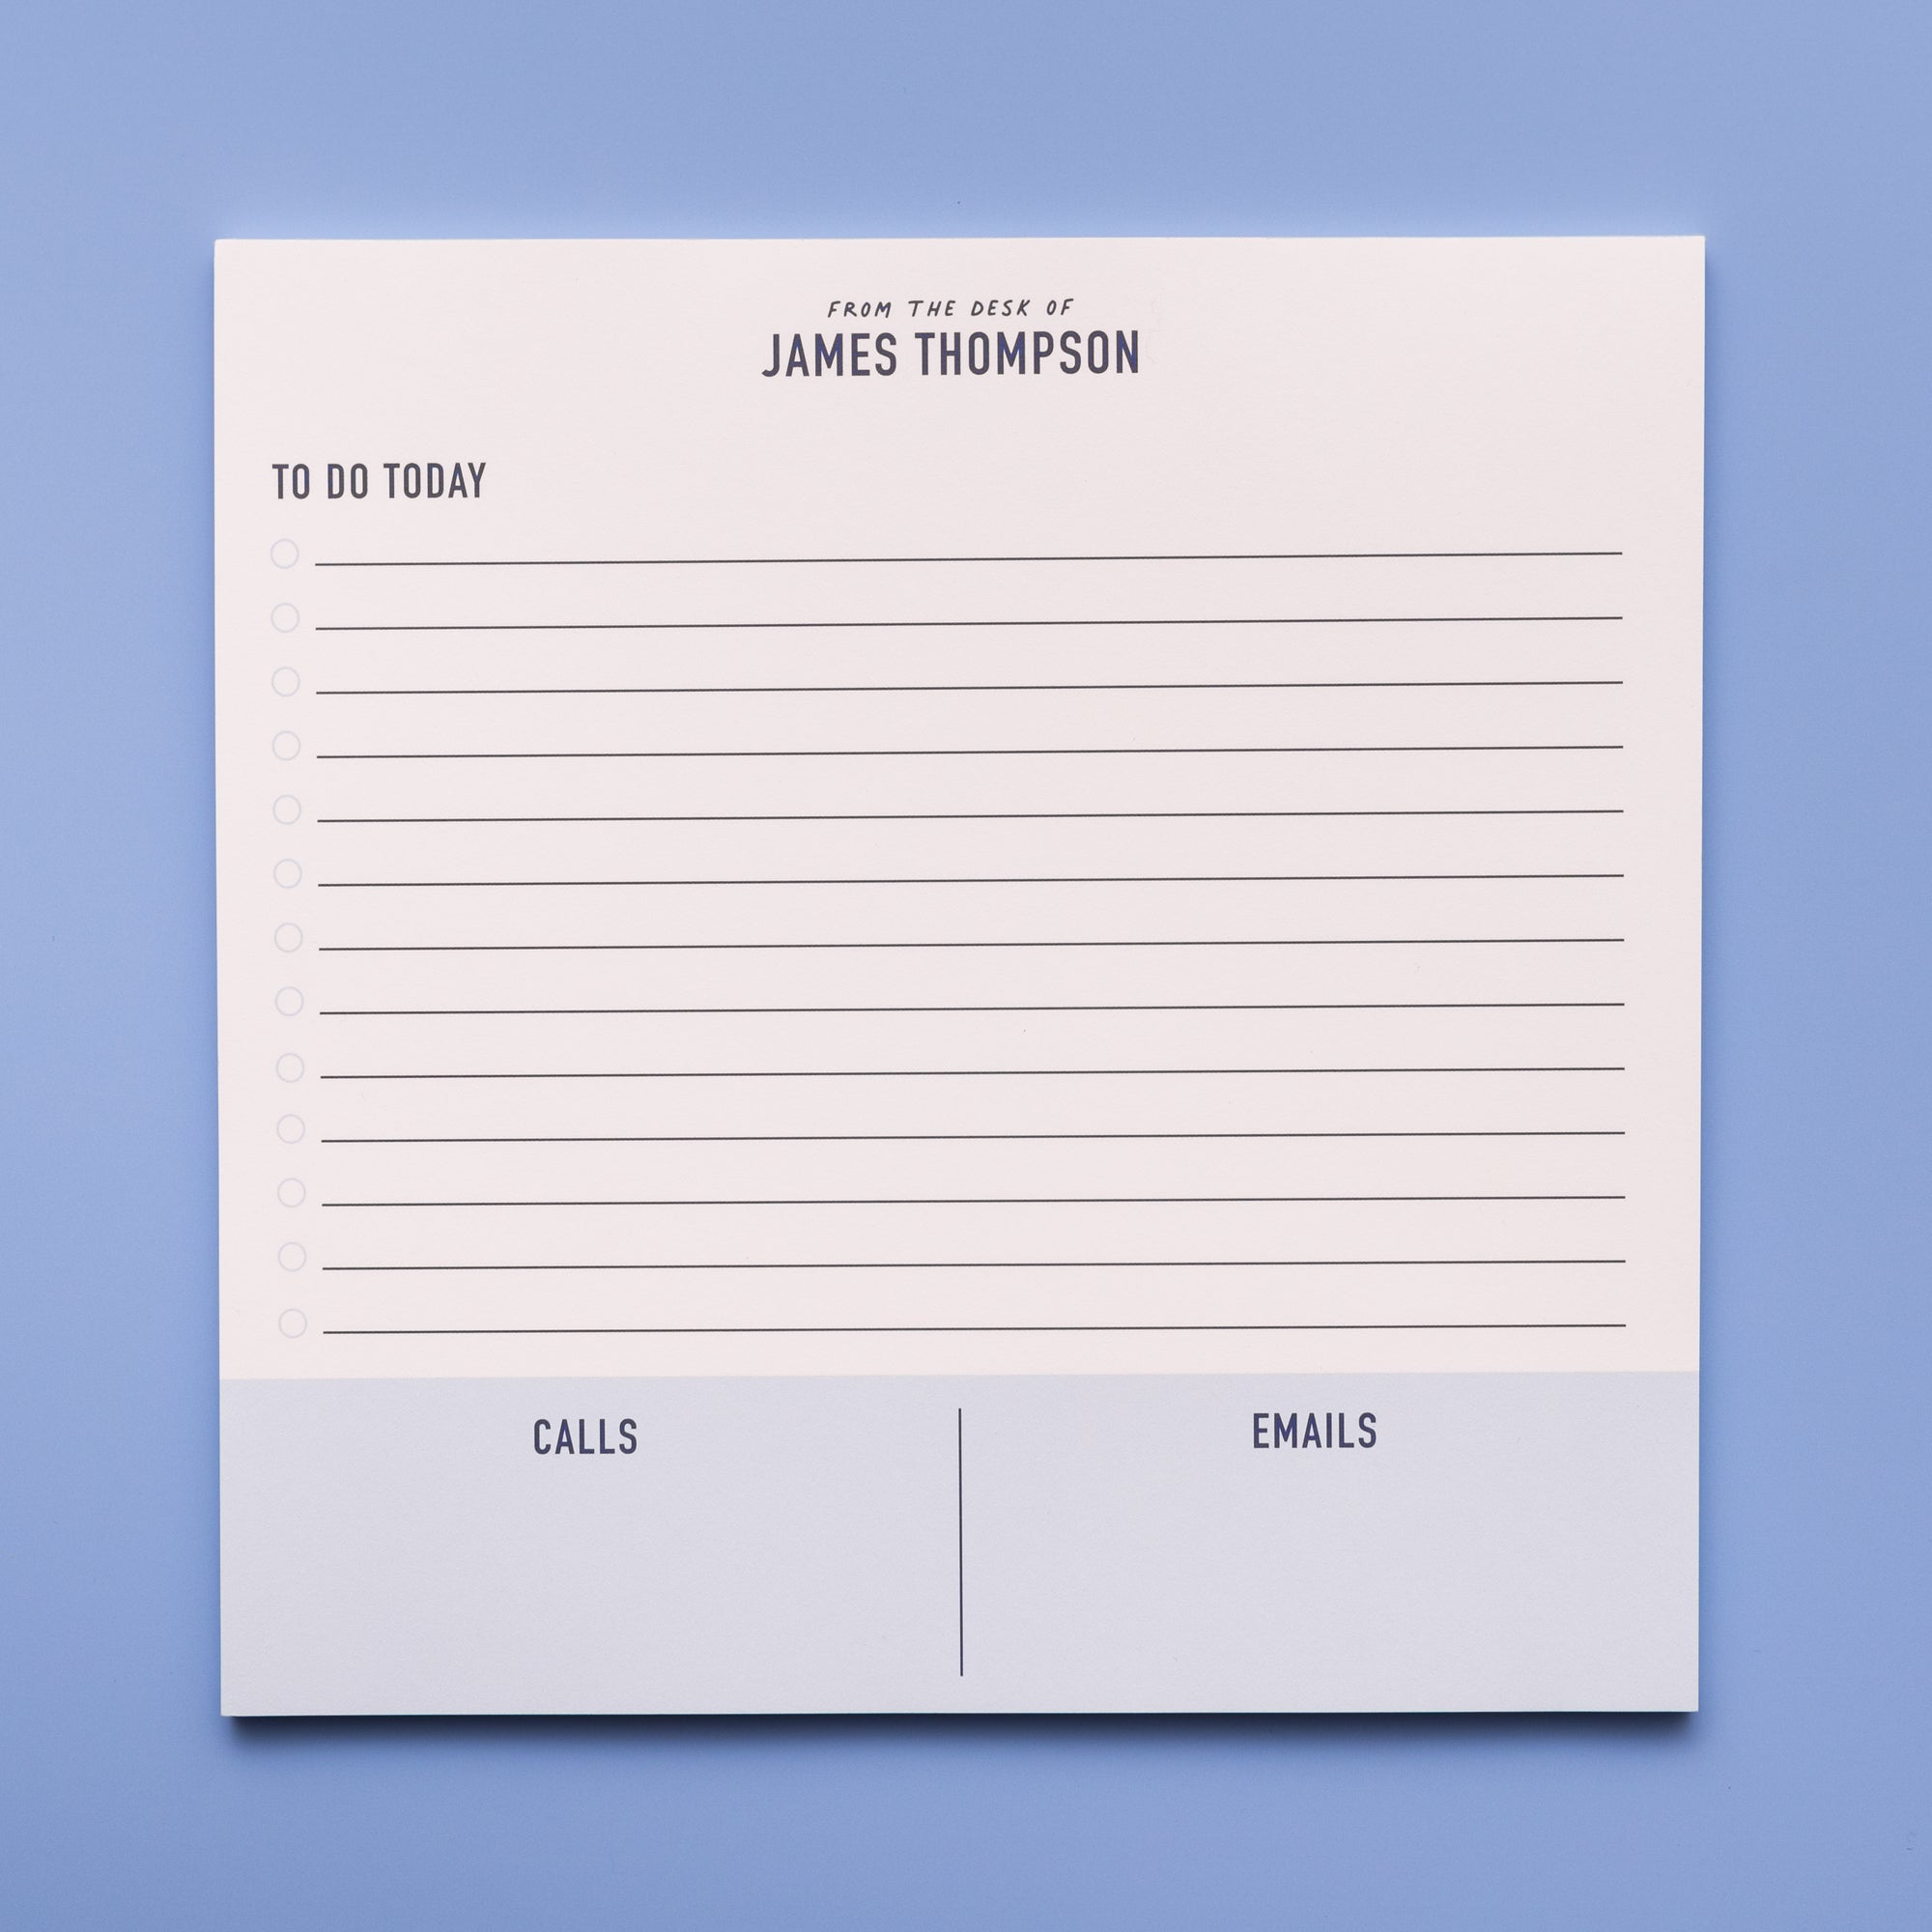 Corporate Notepads